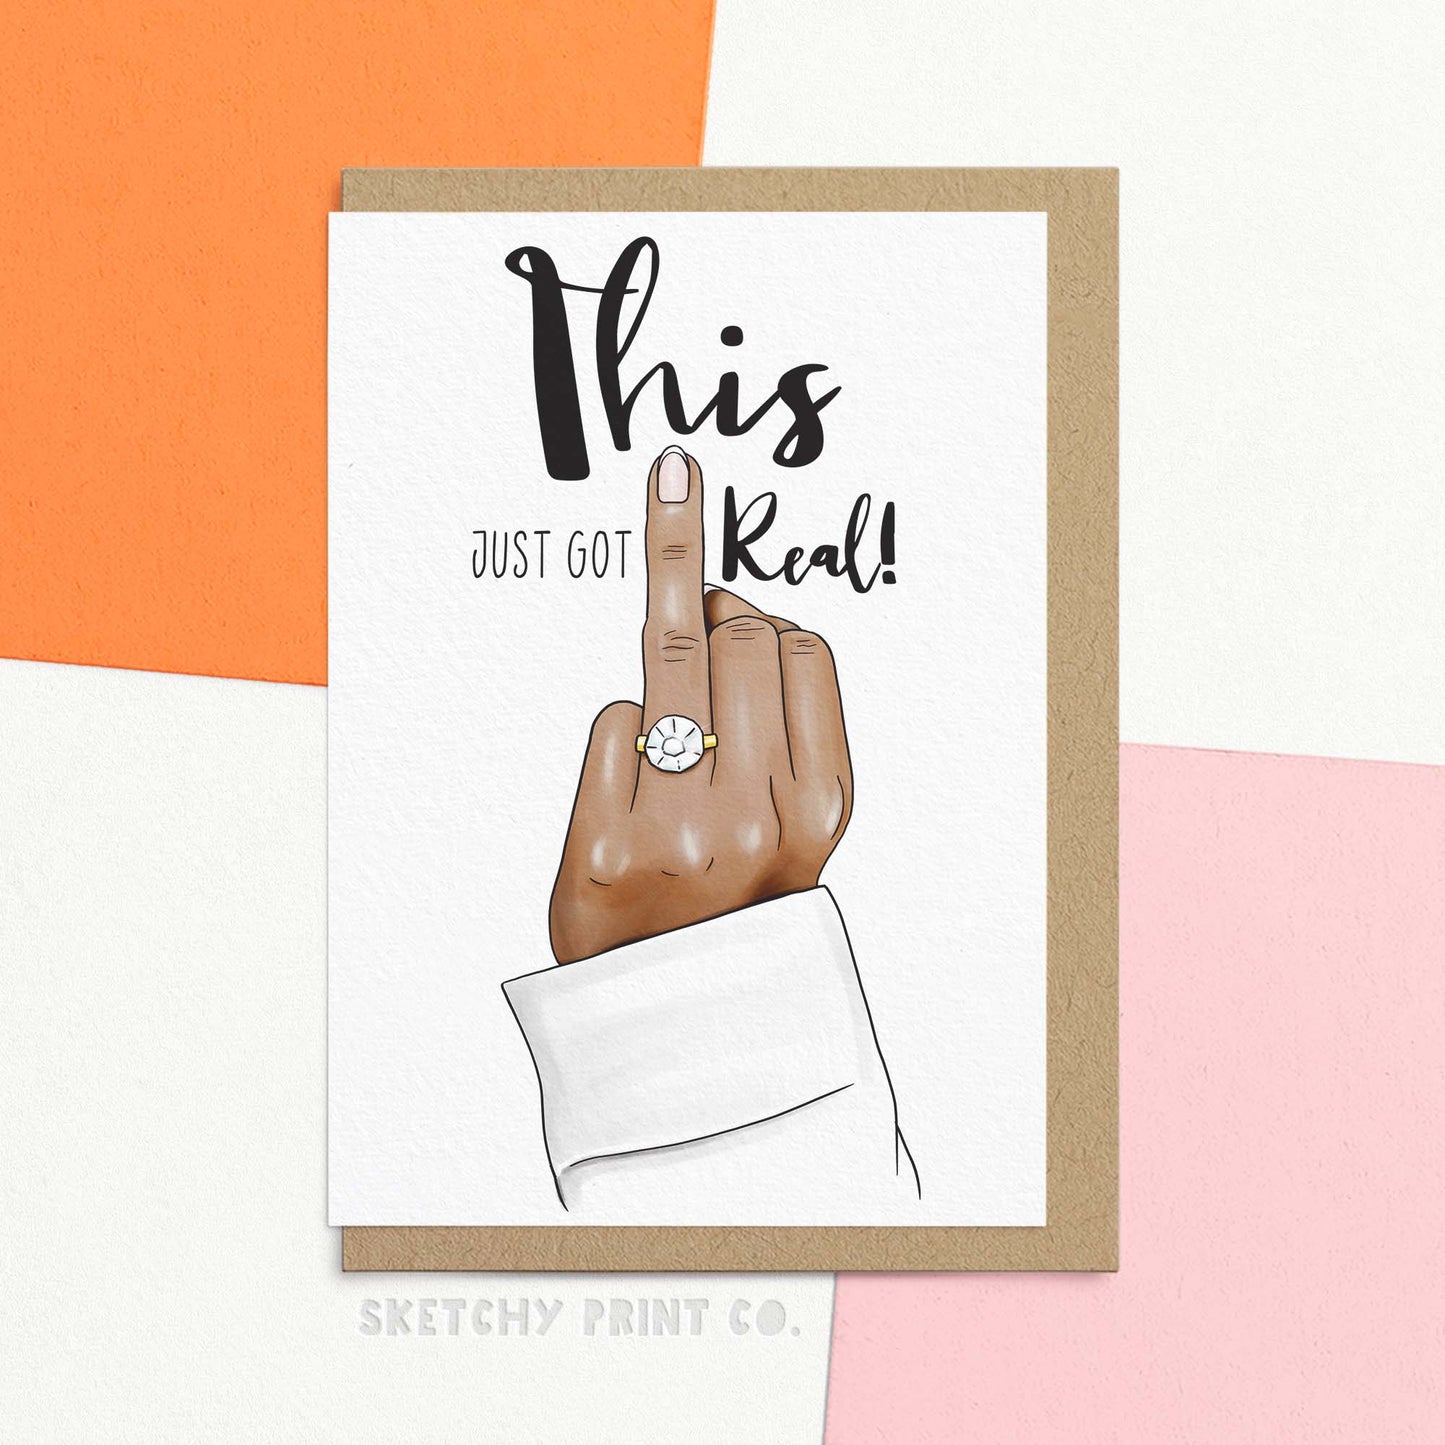 Funny wedding wishes and engagement greetings card reading 'This just got real!' featuring a hand holding up the ring finger showing off a sparkly engagement ring. A hand is holding the card for size reference.